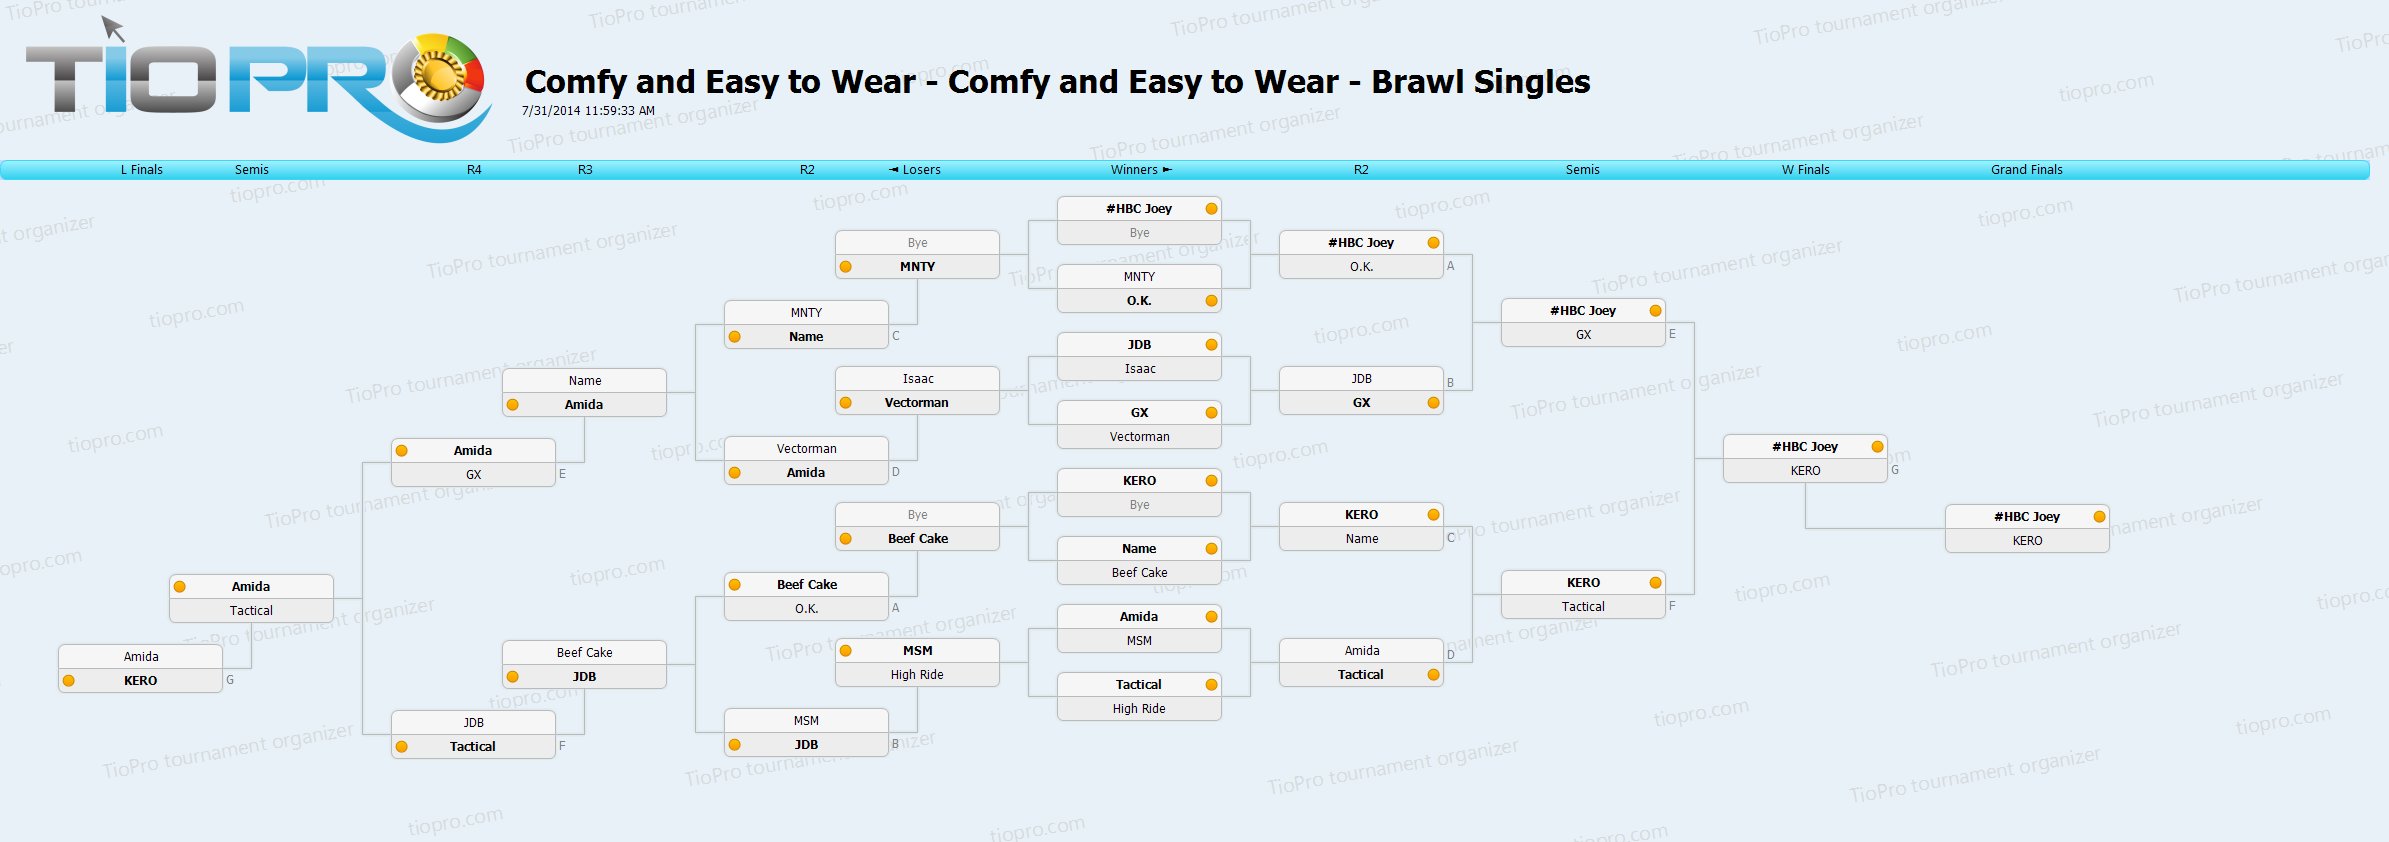 Comfy and Easy to Wear - Brawl Singles